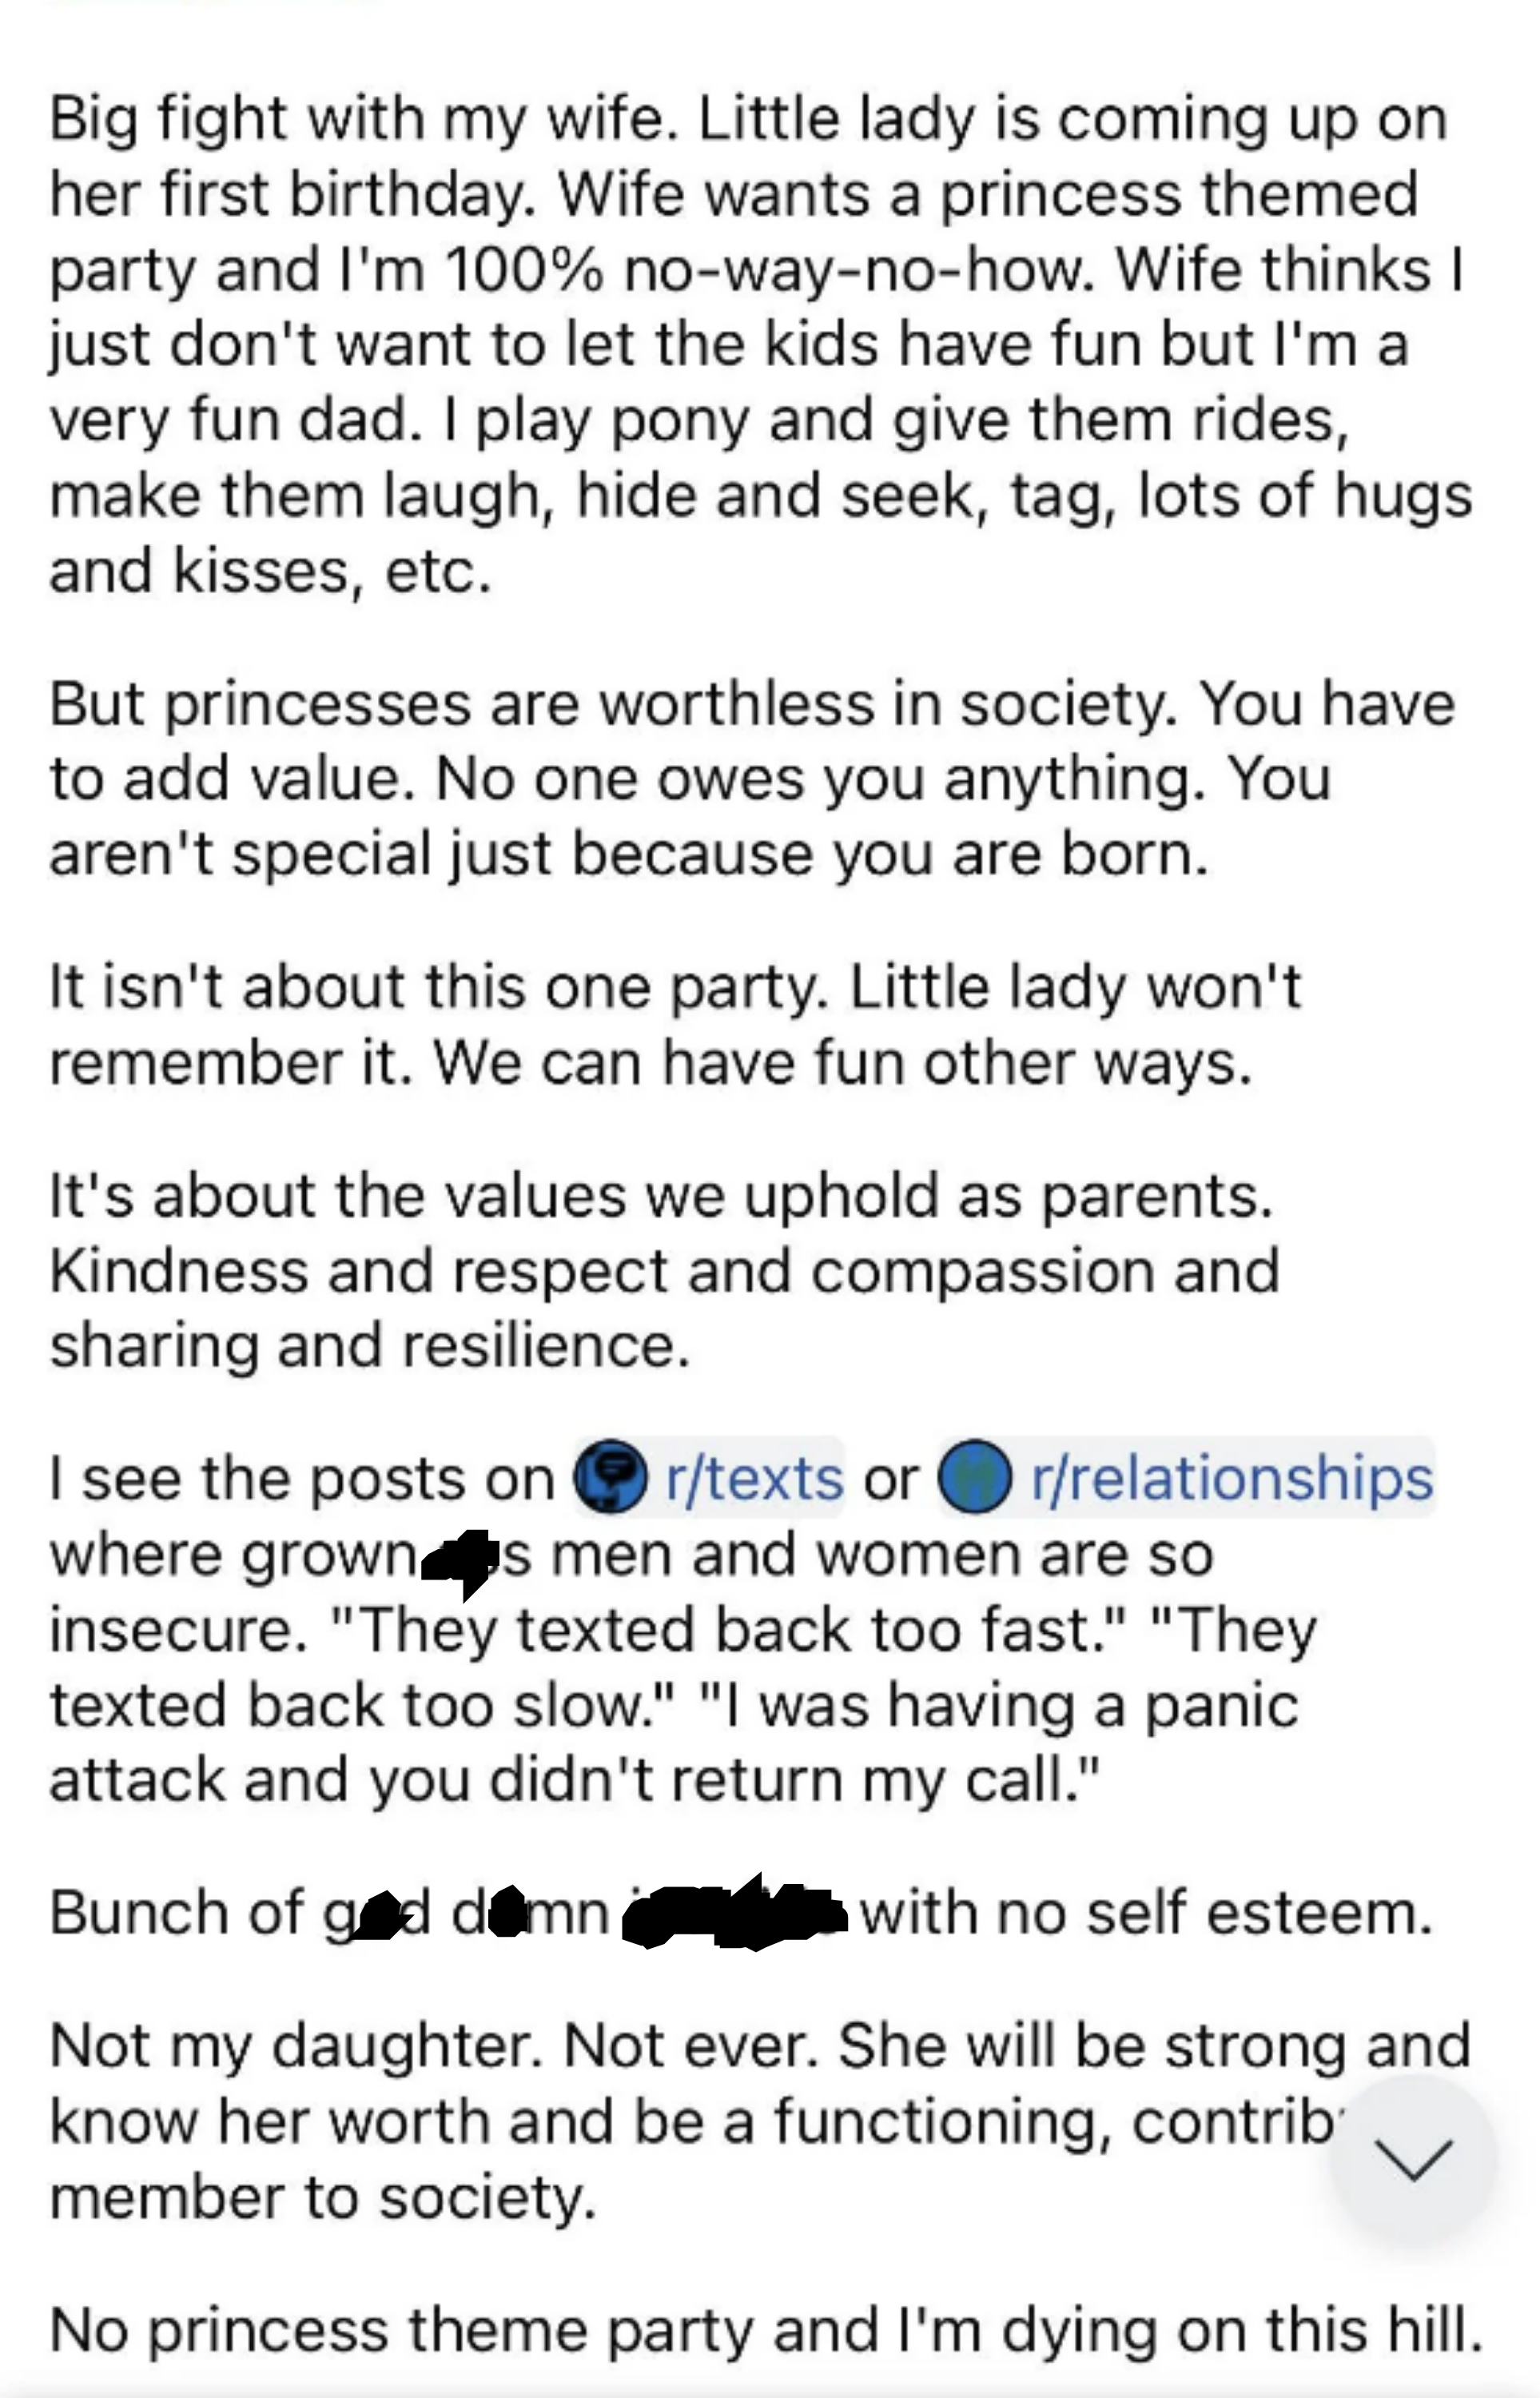 &quot;But princesses are worthless in society.&quot;